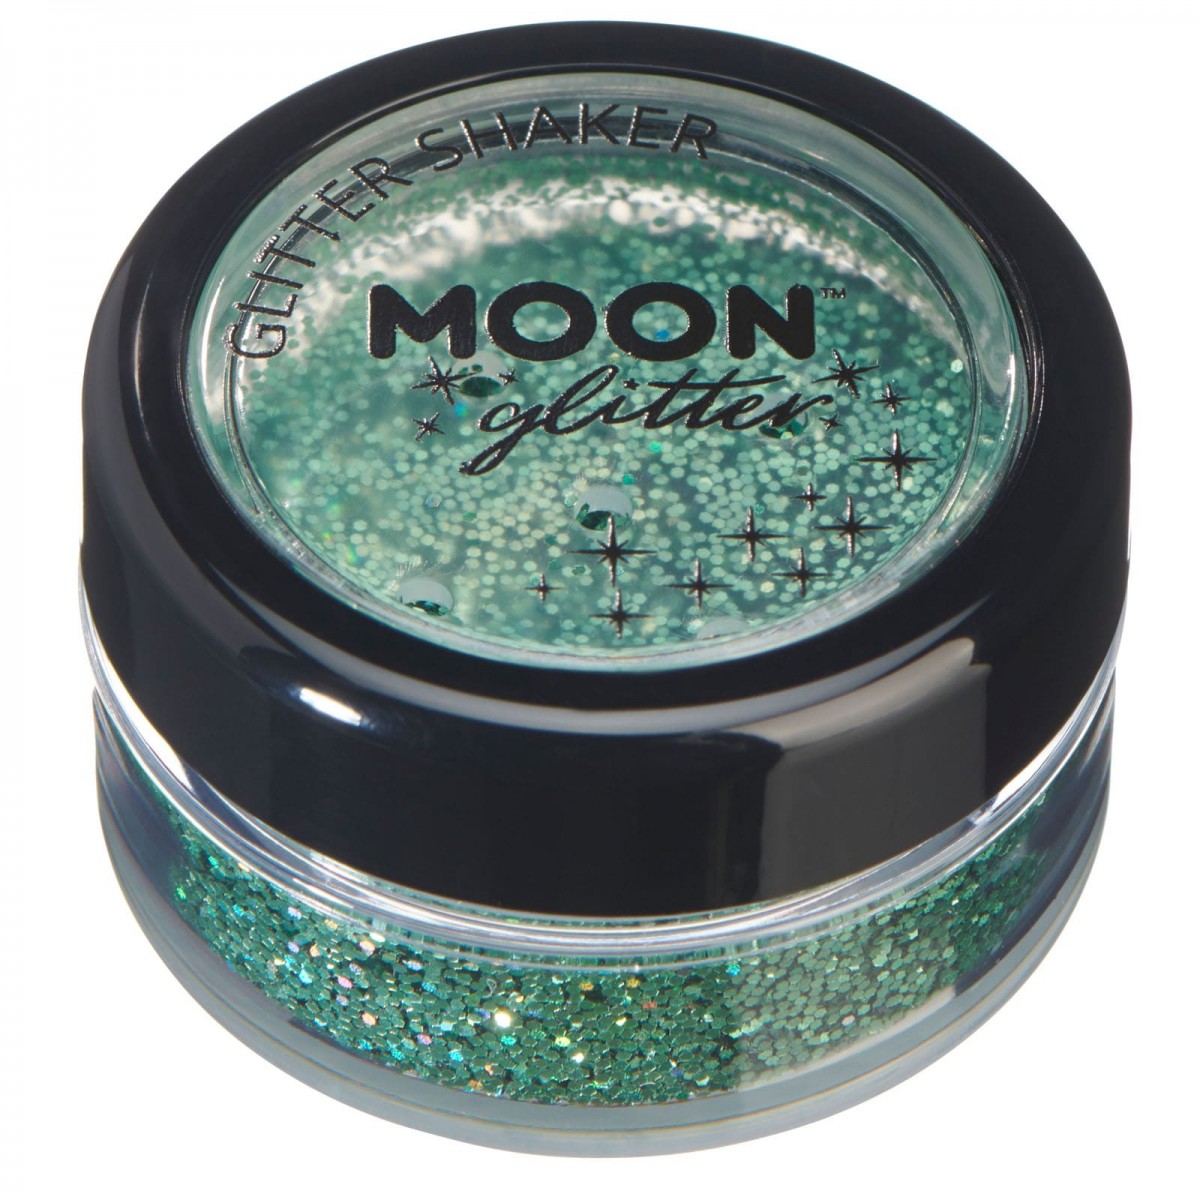 MOON CREATIONS G16 HOLOGRAPHIC GLITTER SHAKER GREEN 5g